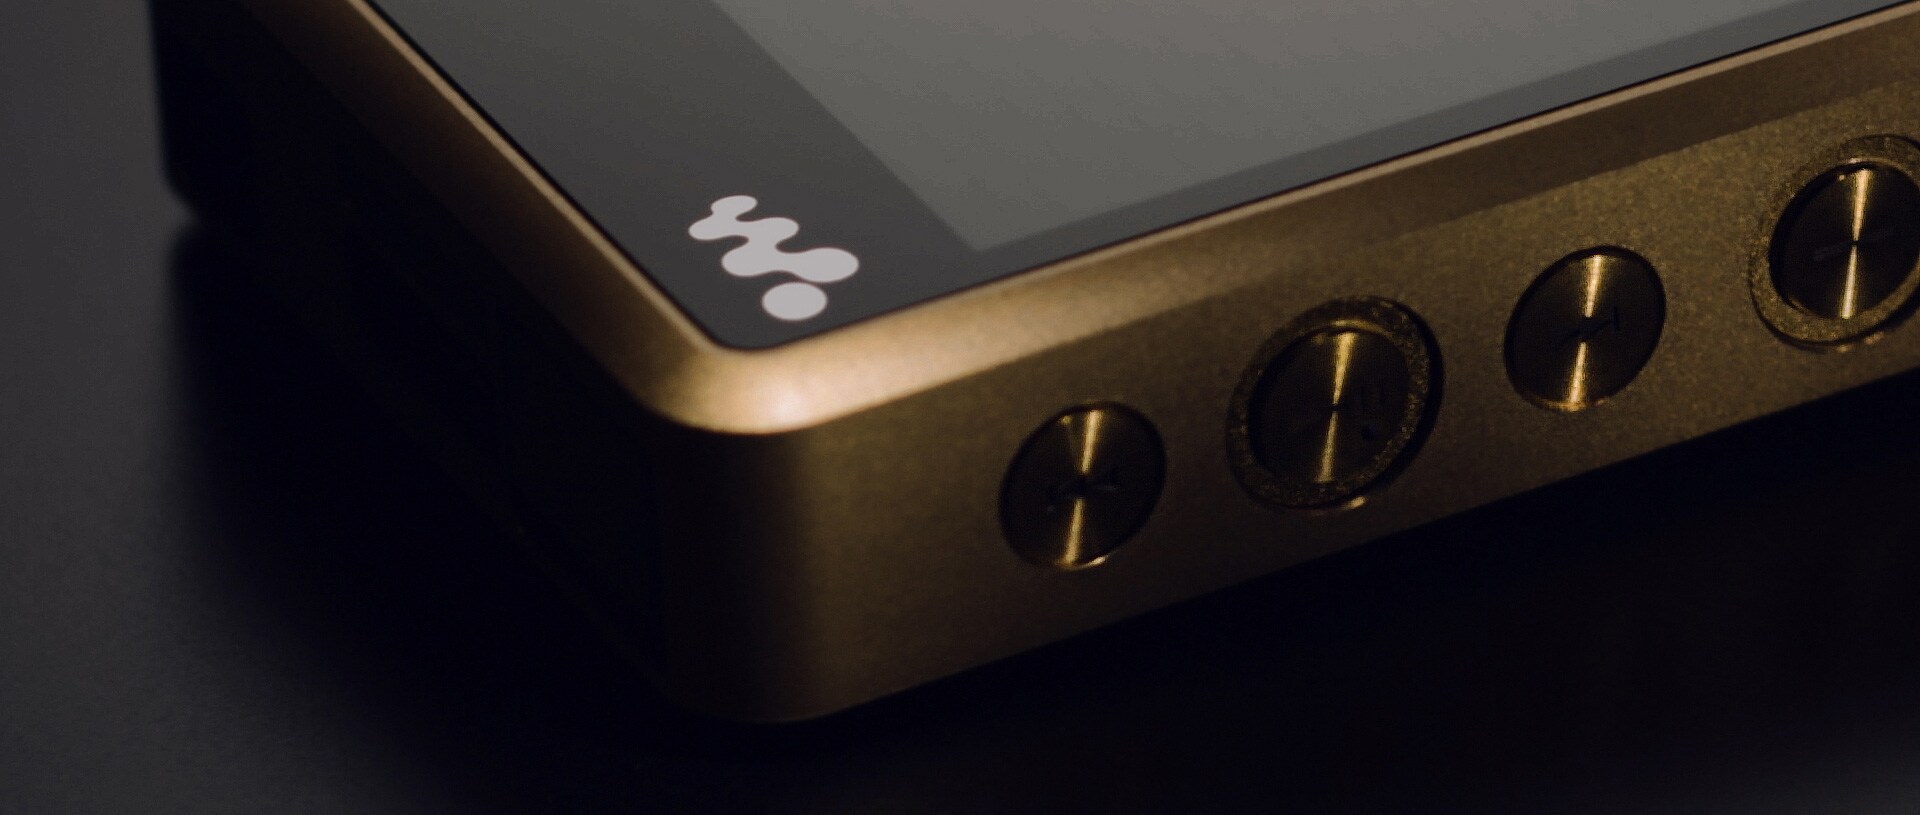 The premium Walkman®'s gold-plated oxygen-free copper chassis